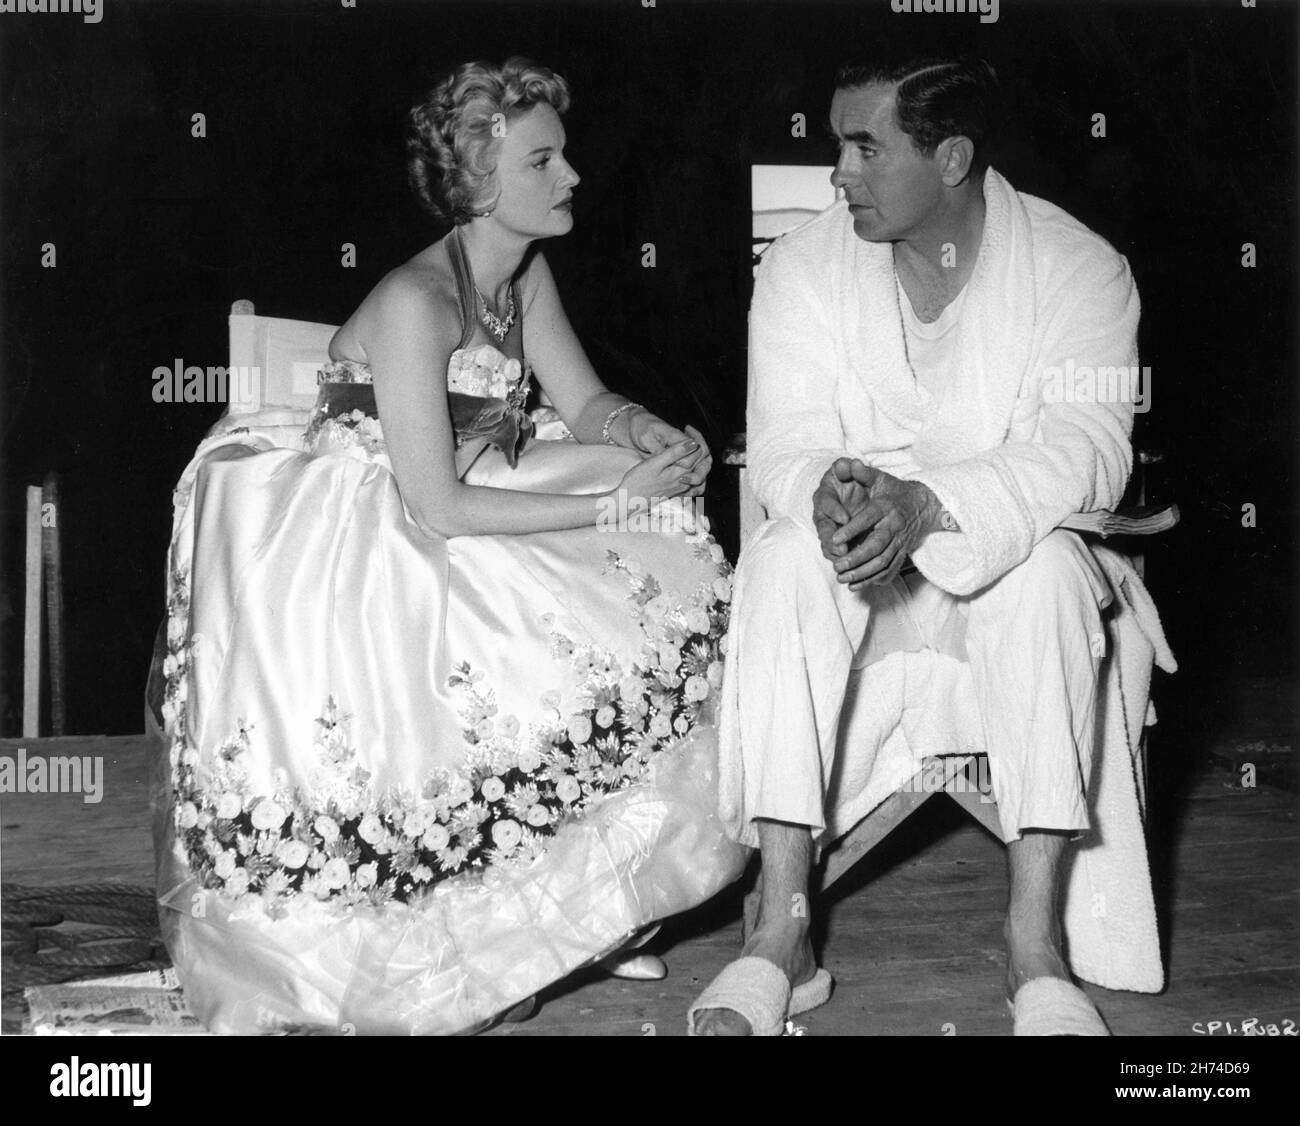 MOIRA LISTER and TYRONE POWER on set candid at Shepperton Studios during filming of SEVEN WAVES AWAY aka ABANDON SHIP ! 1957 director / writer RICHARD SALE music Sir Arthur Bliss producers Tyrone Power and John R. Sloan executive producer Ted Richmond UK - USA co-production Copa Productions / Columbia Pictures Corporation Stock Photo